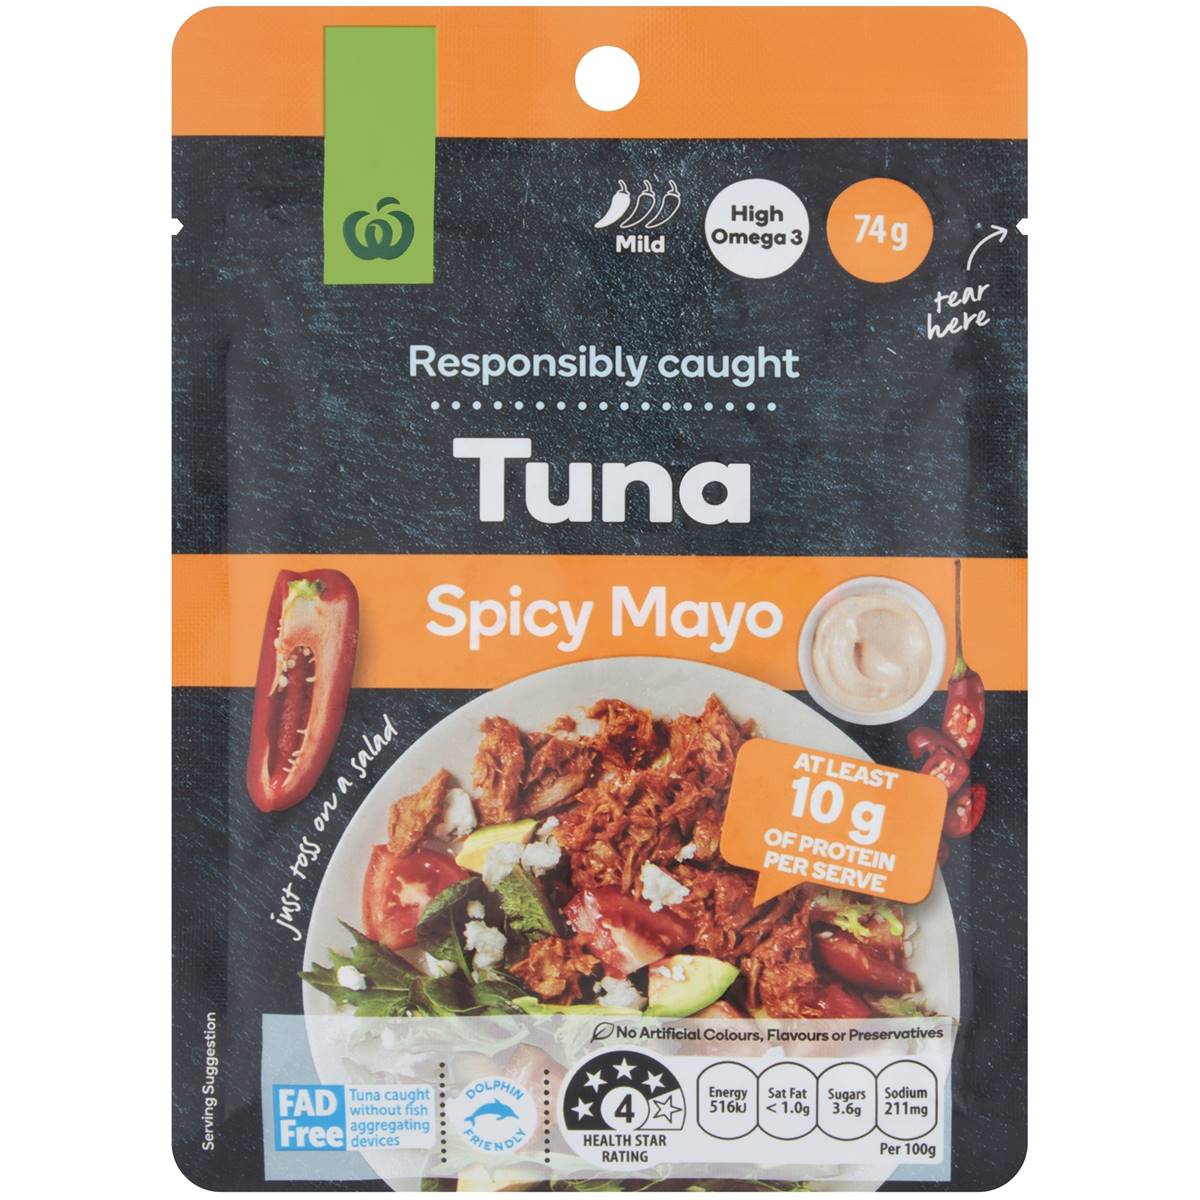 Calories in Woolworths Tuna Spicy Mayo Pouch